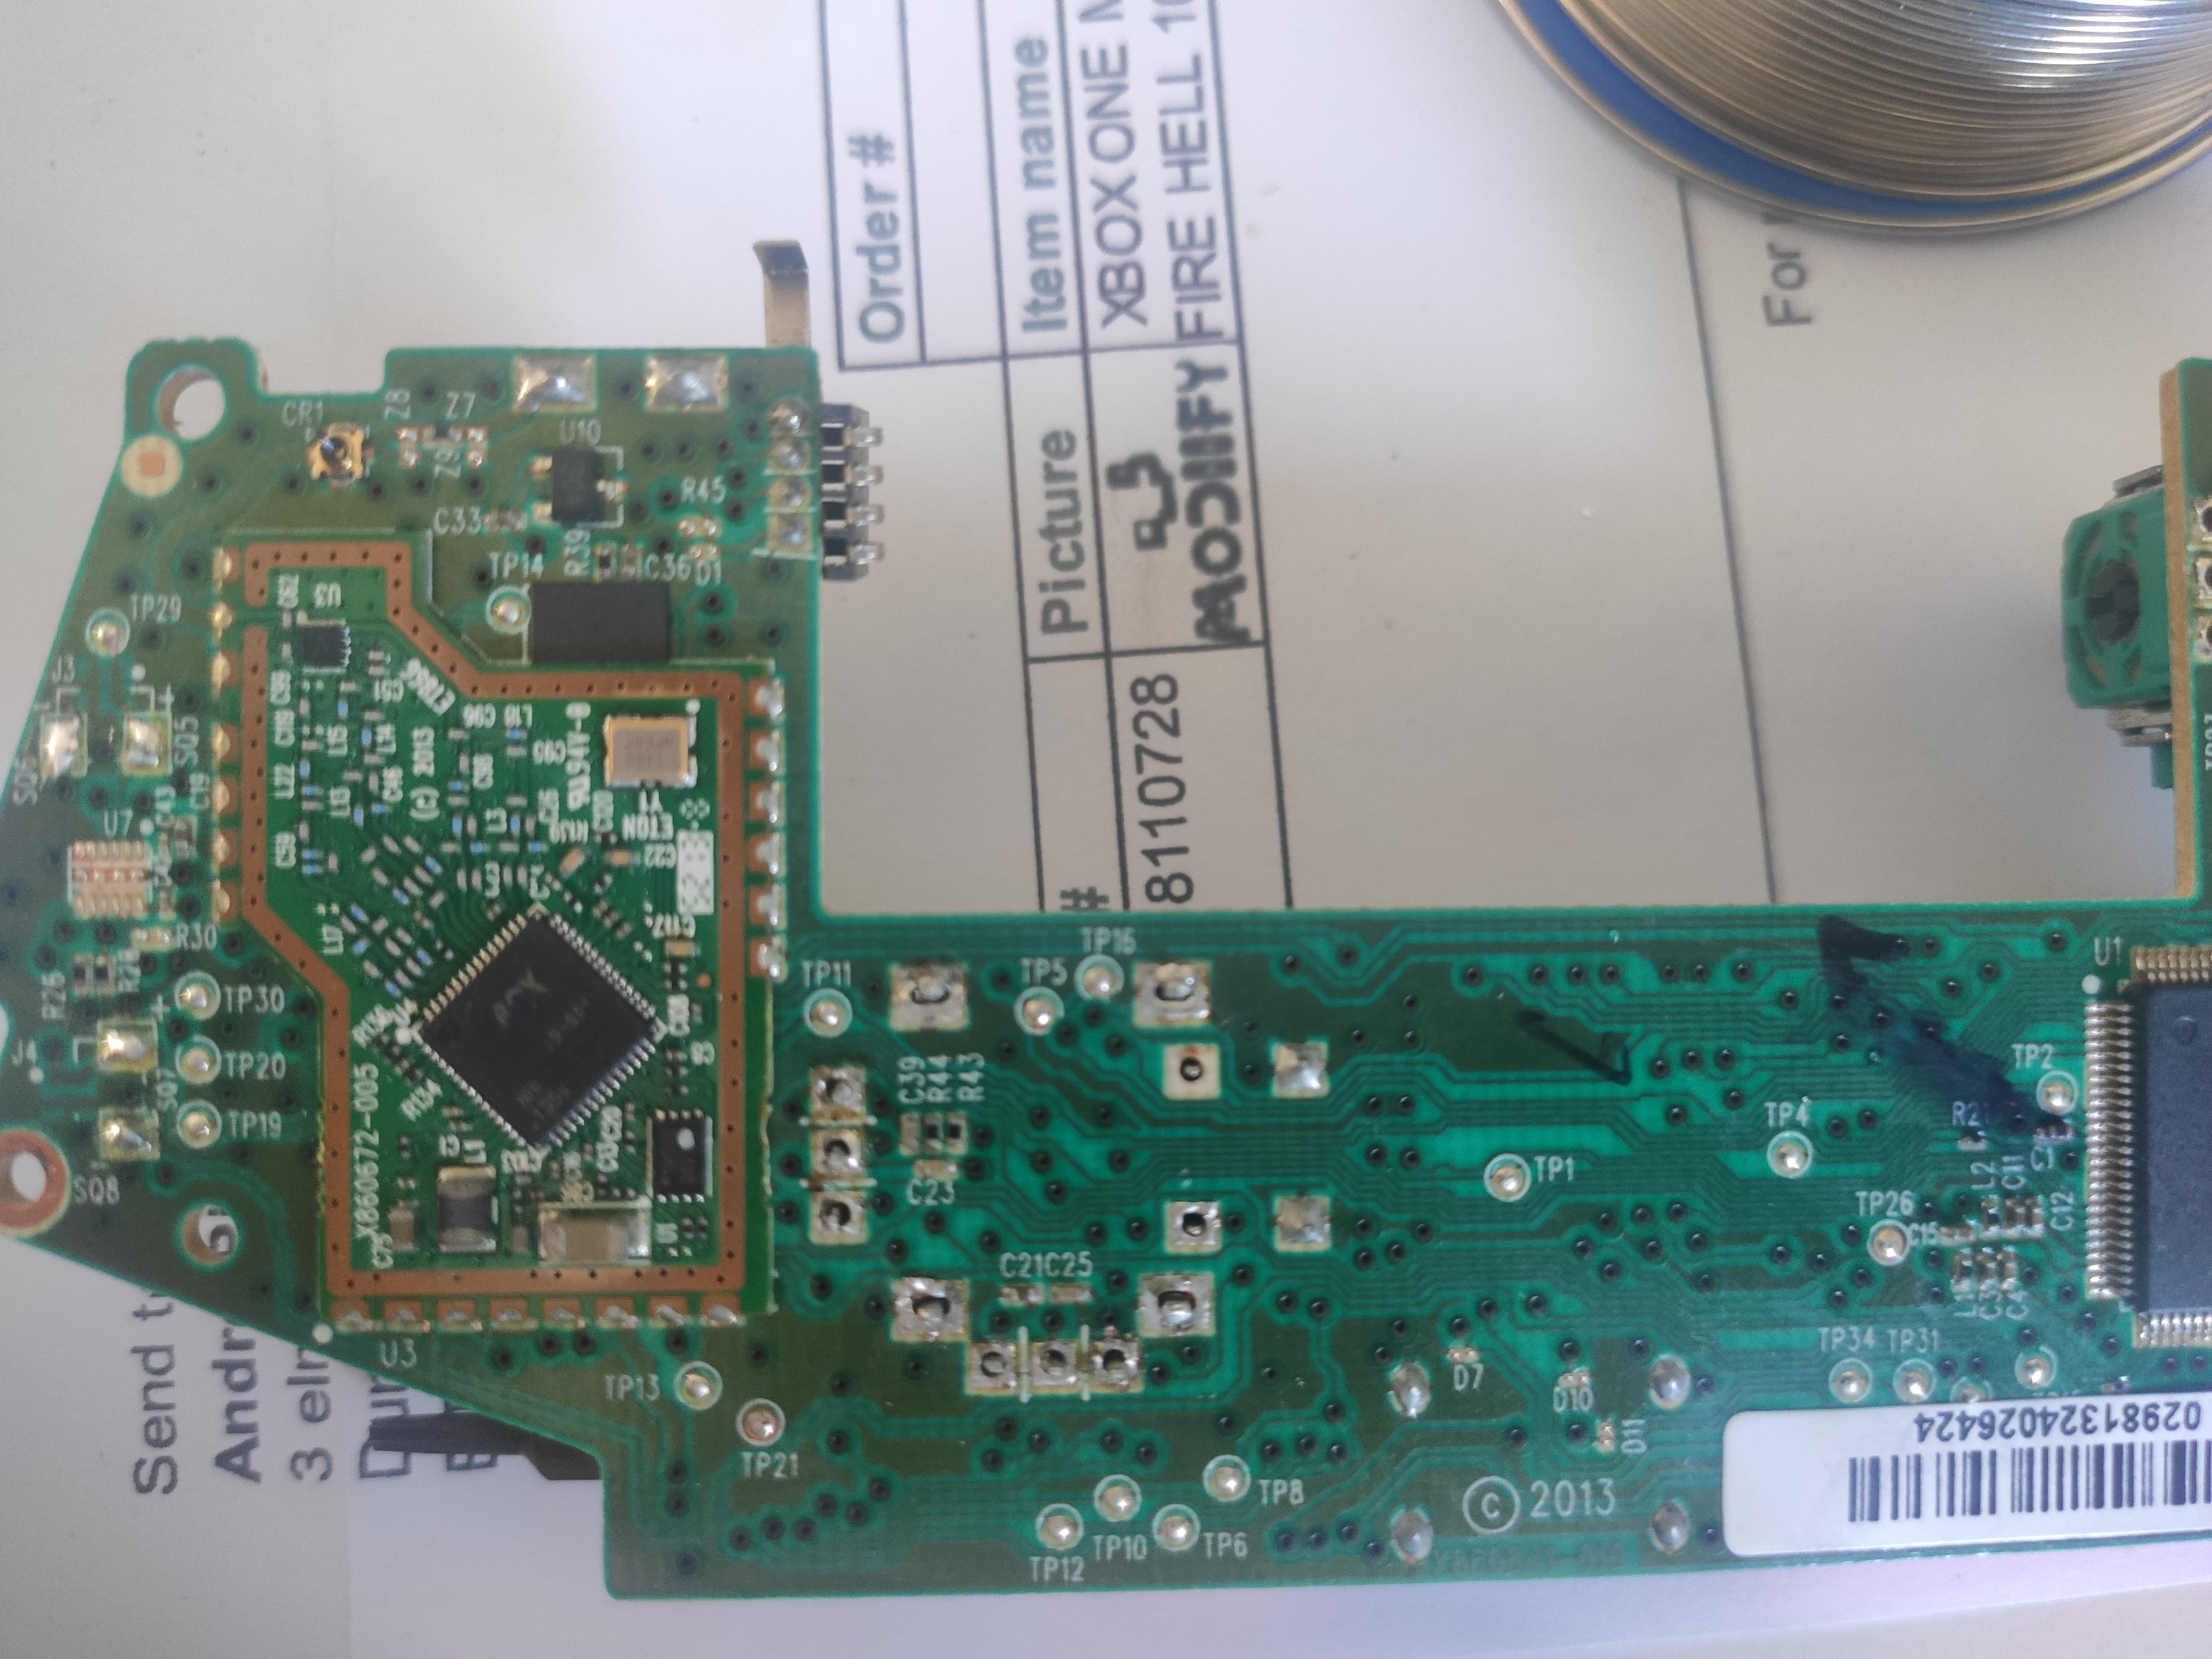 Xbox one controller (model 1537) damaged analog pads on PCB | GBAtemp.net -  The Independent Video Game Community